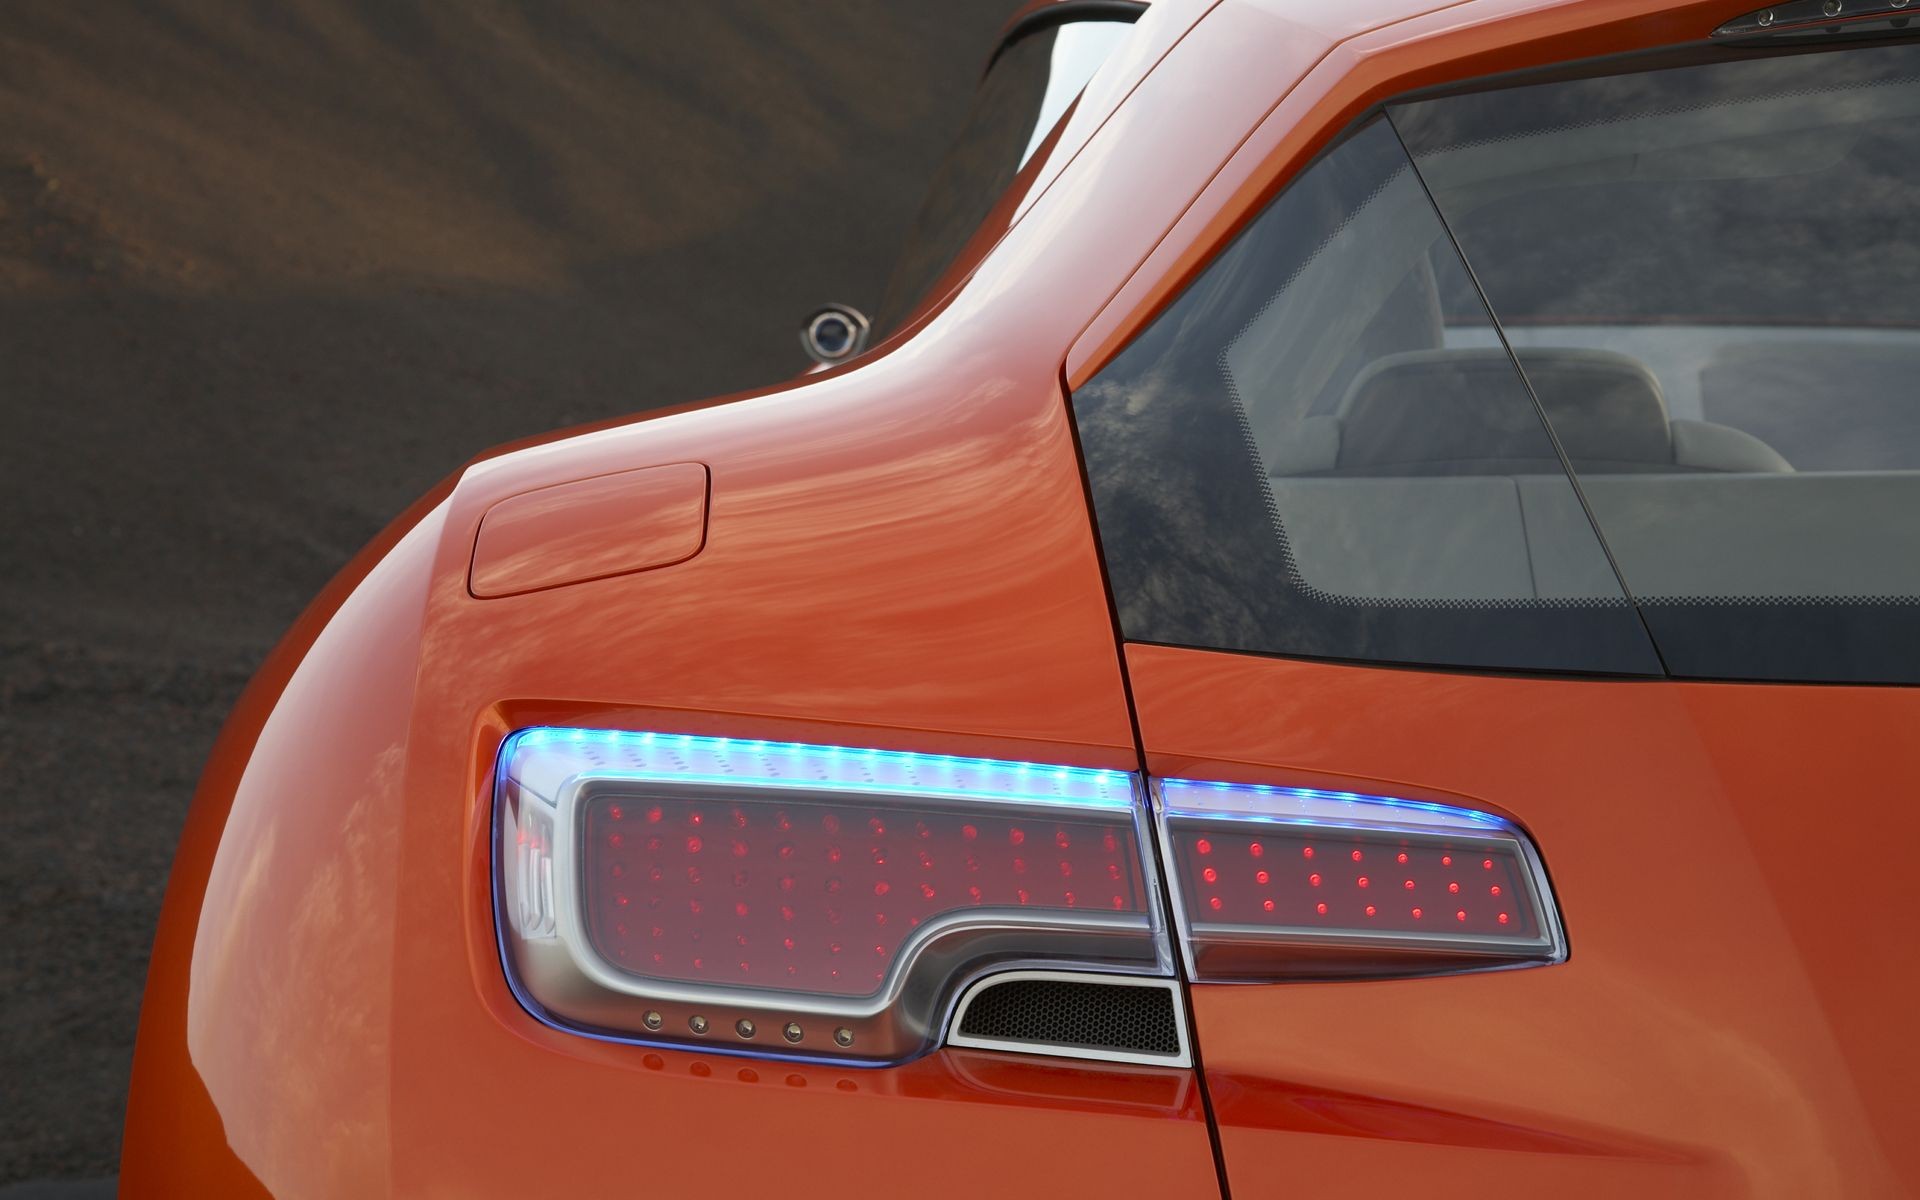 close up, Cars, Orange, Back, View, Vehicles, Concept, Cars, Orange, Cars, American, Cars, Taillights, Dodge, Zeo Wallpaper